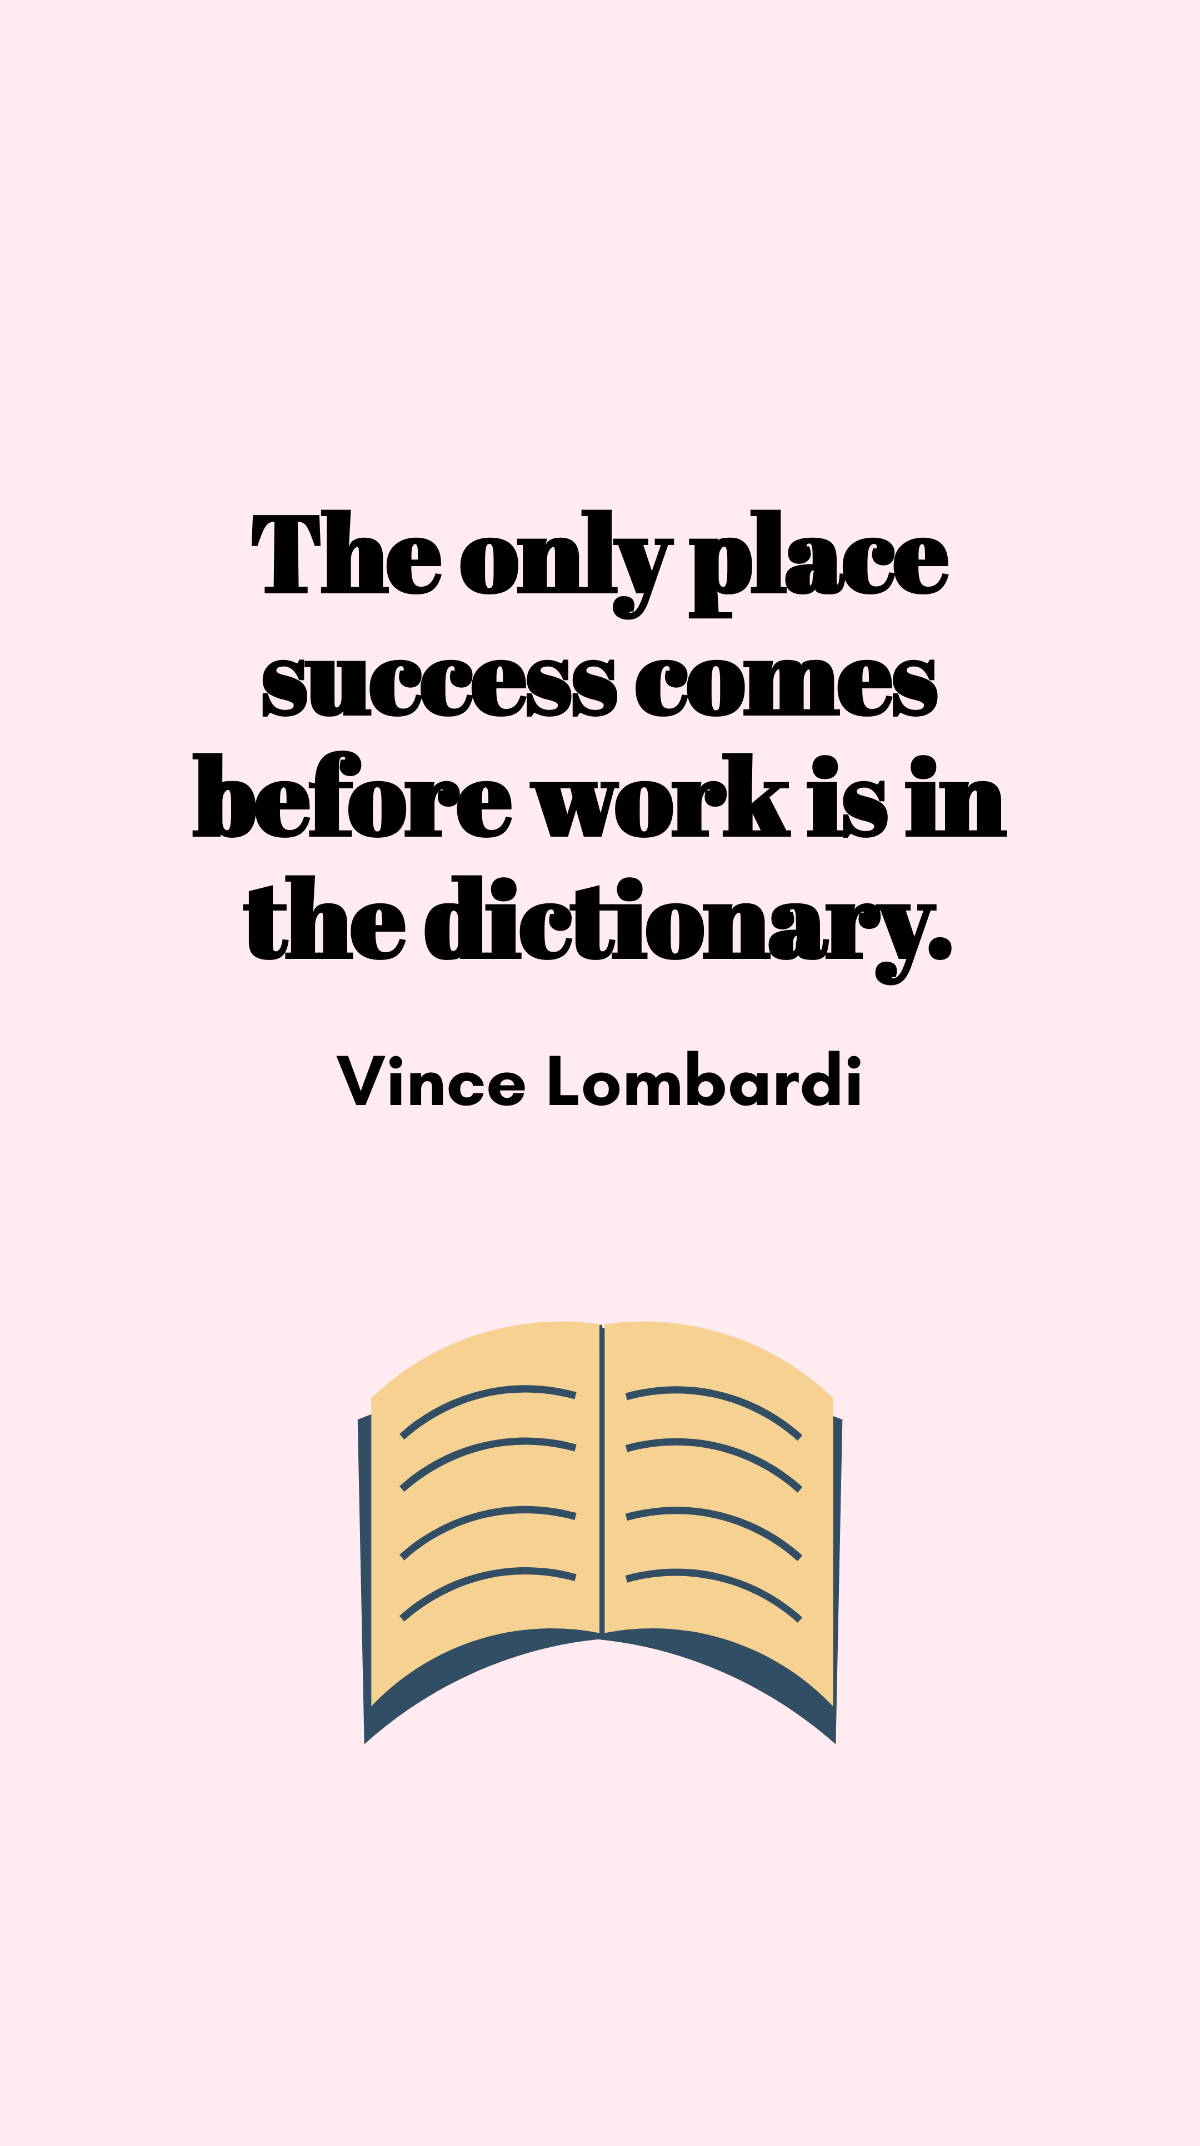 Vince Lombardi - The only place success comes before work is in the dictionary. Template